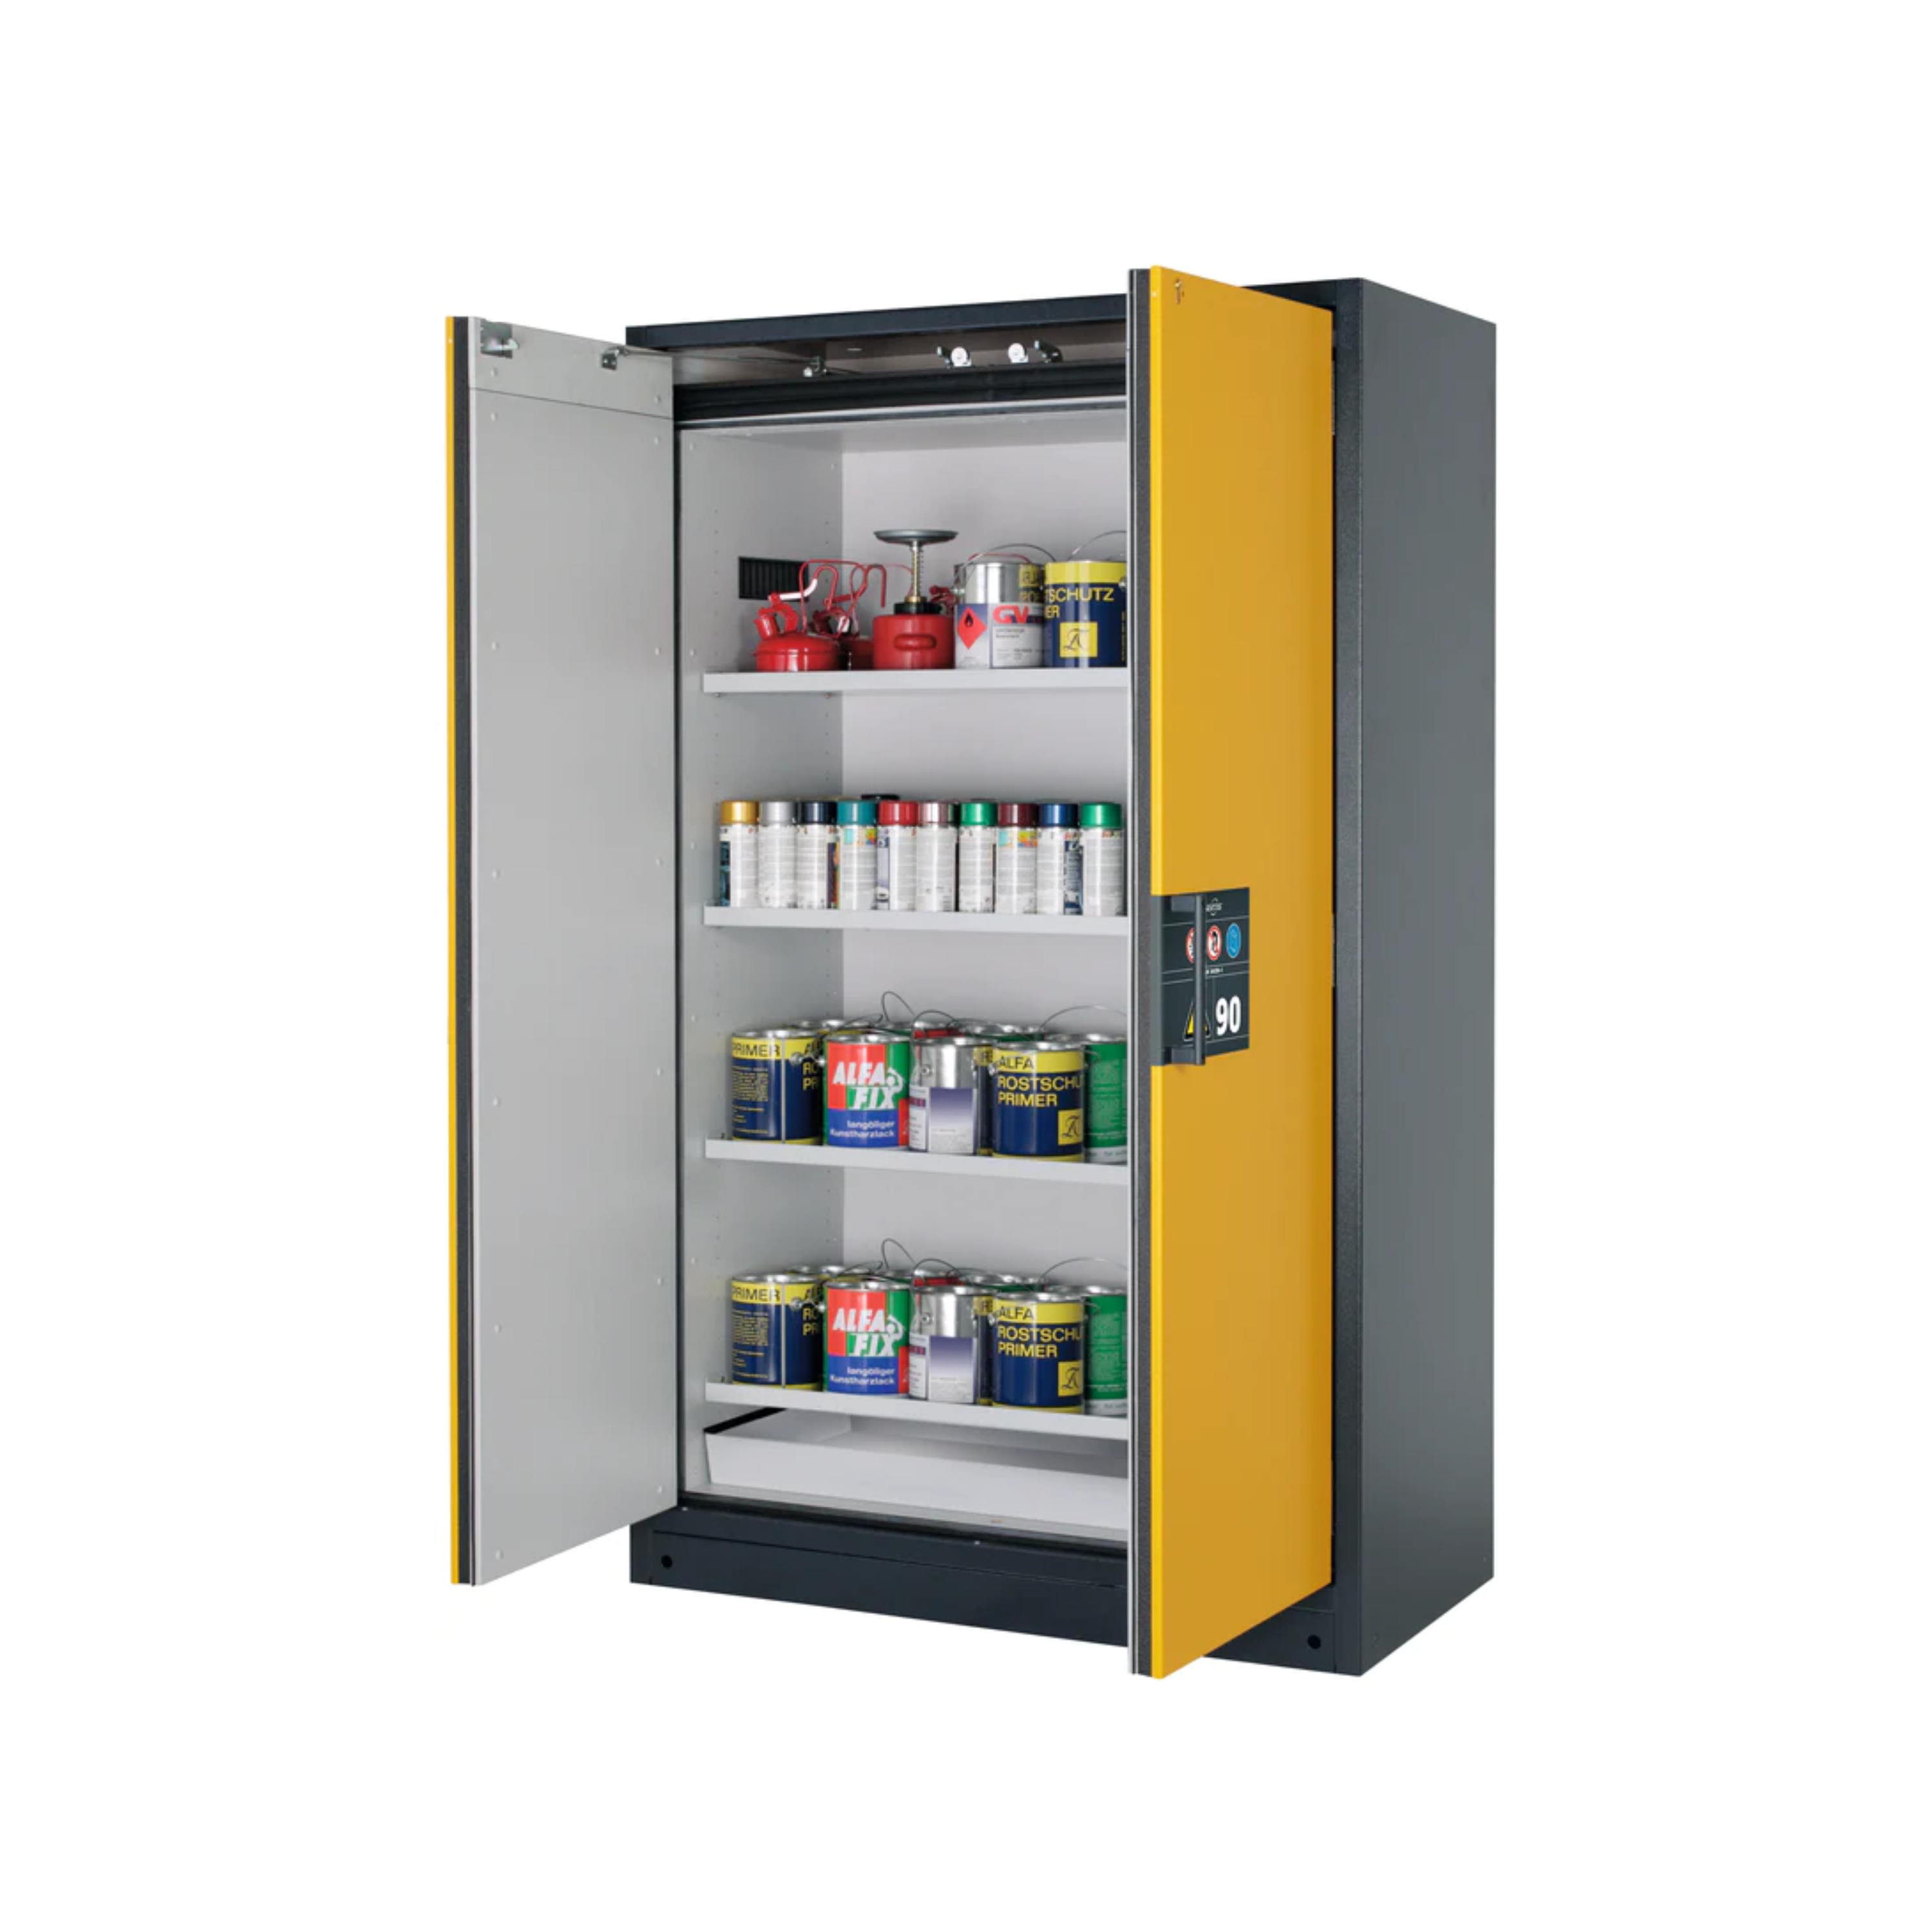 Type 90 safety storage cabinet Q-CLASSIC-90 model Q90.195.120 in warning yellow RAL 1004 with 4x shelf standard (sheet steel),